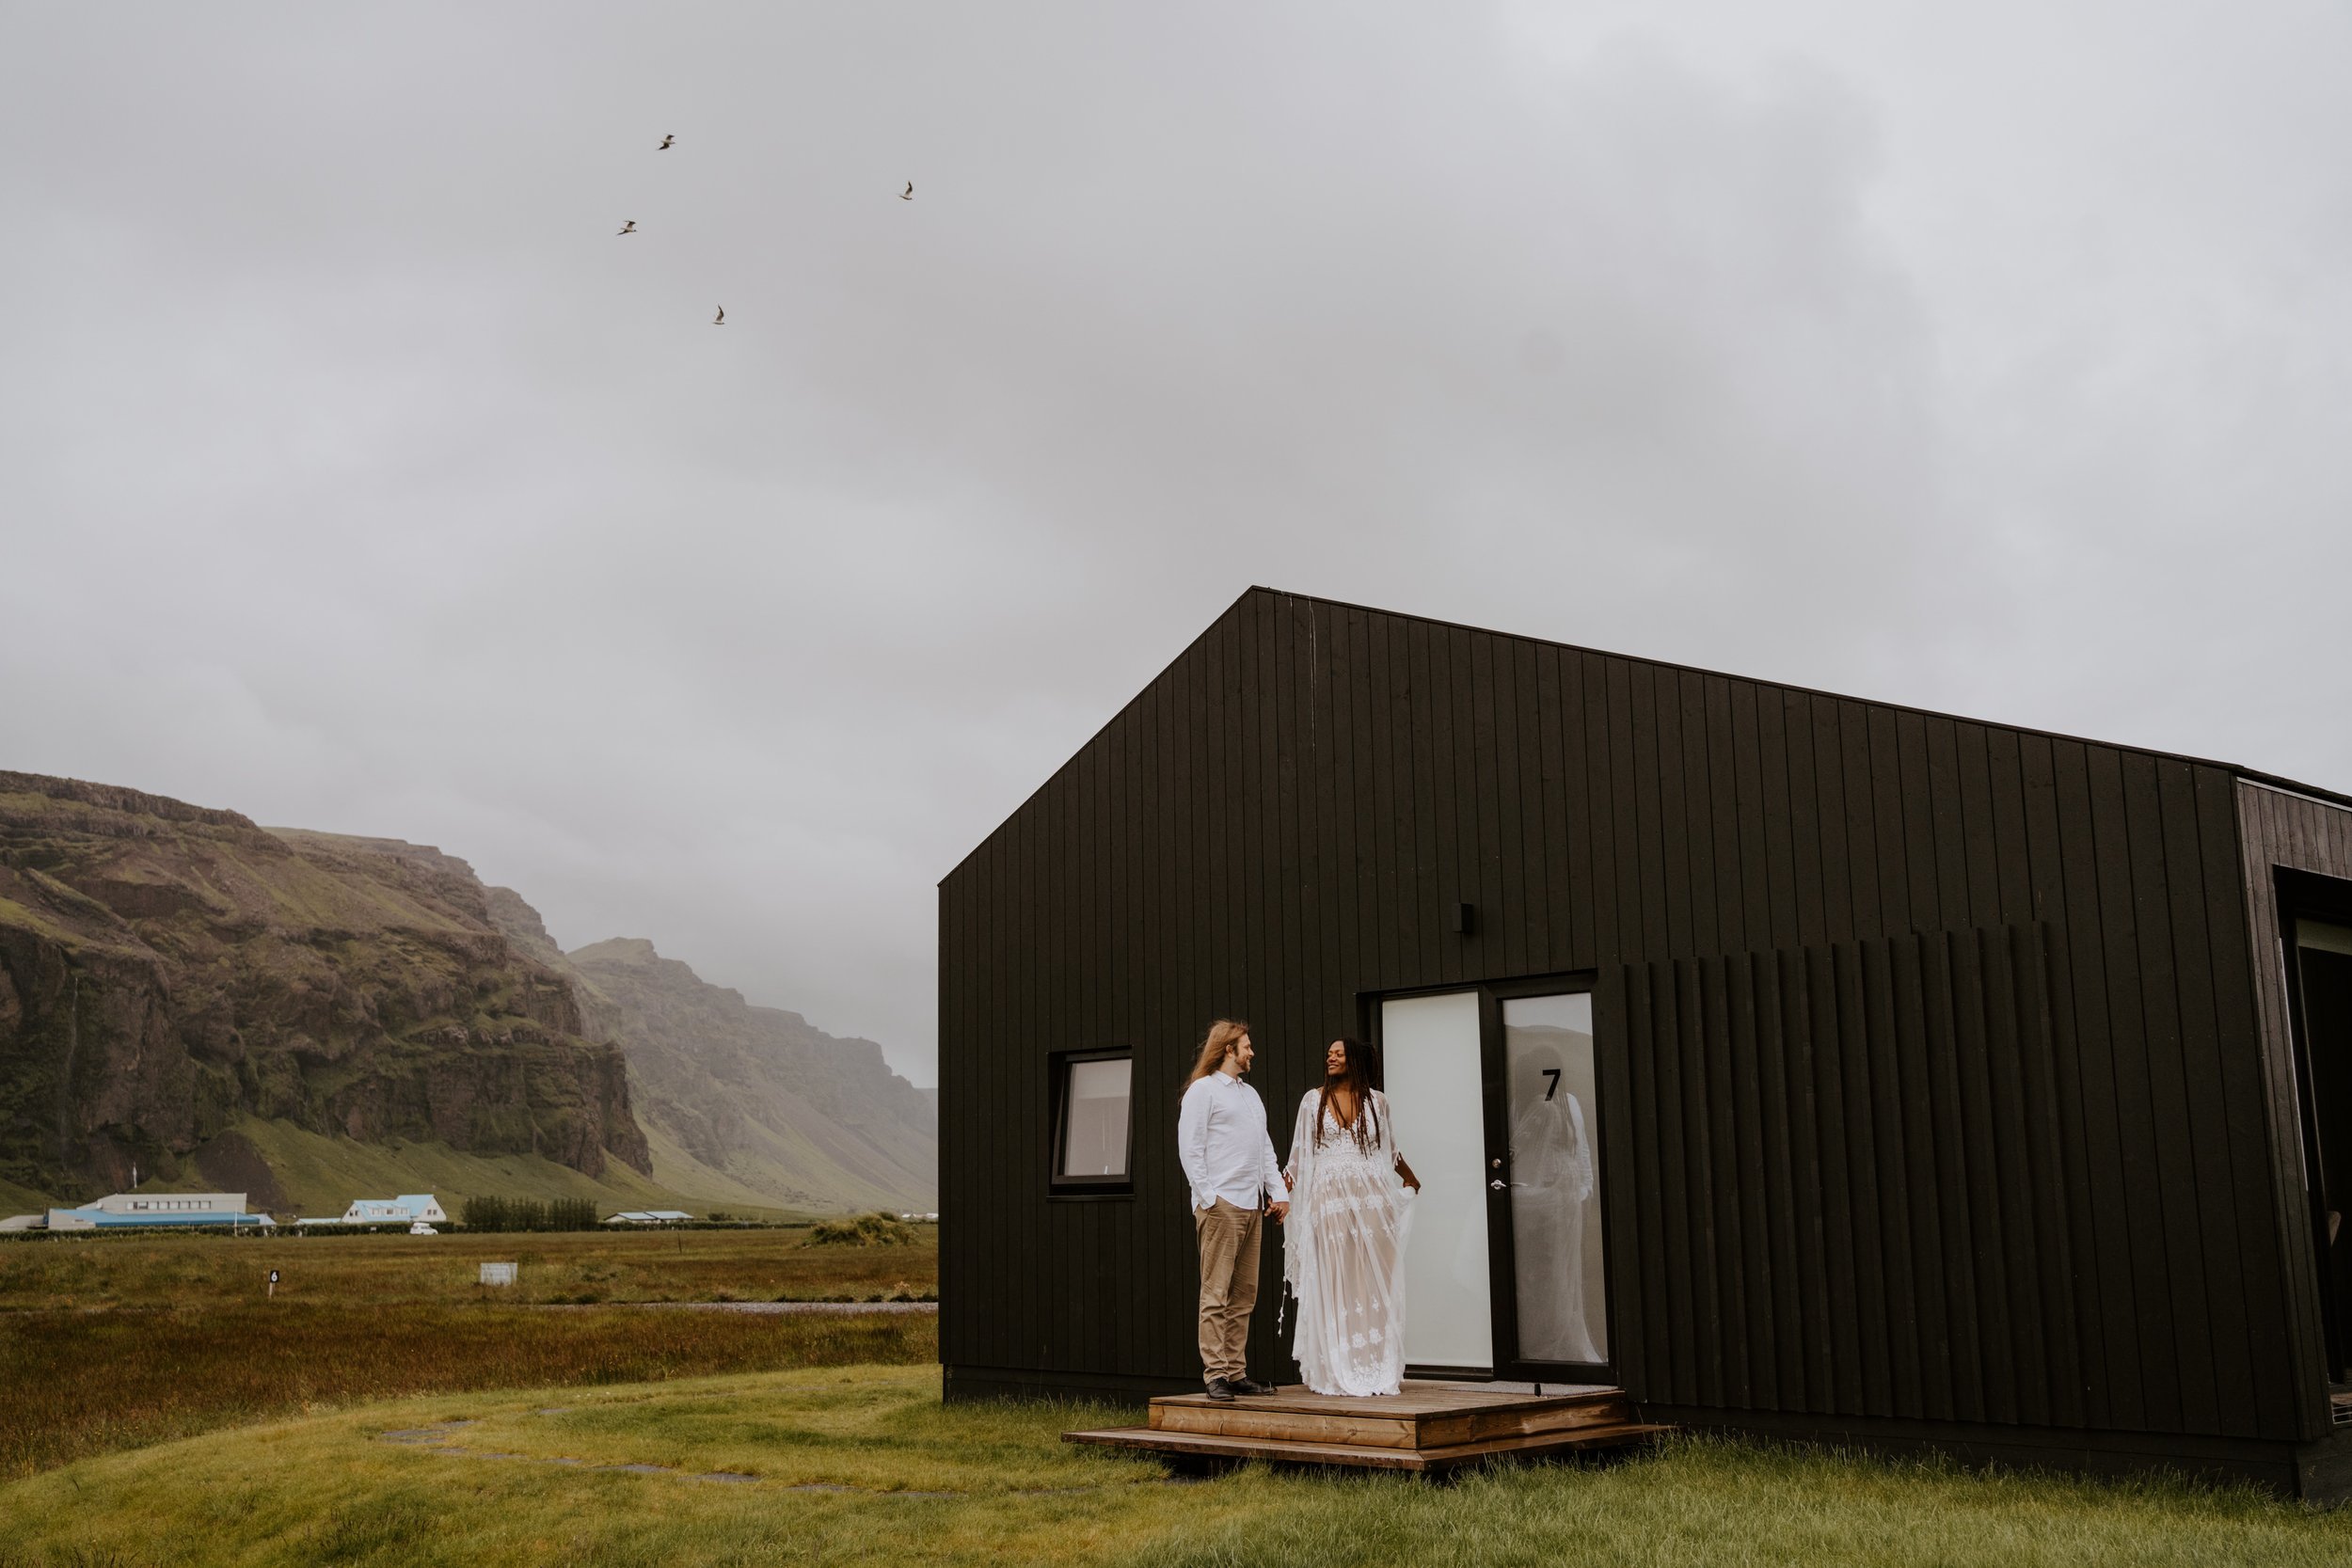 Iceland airbnb elopement near skogafoss falls | iceland elopement photographer | photo by tida svy